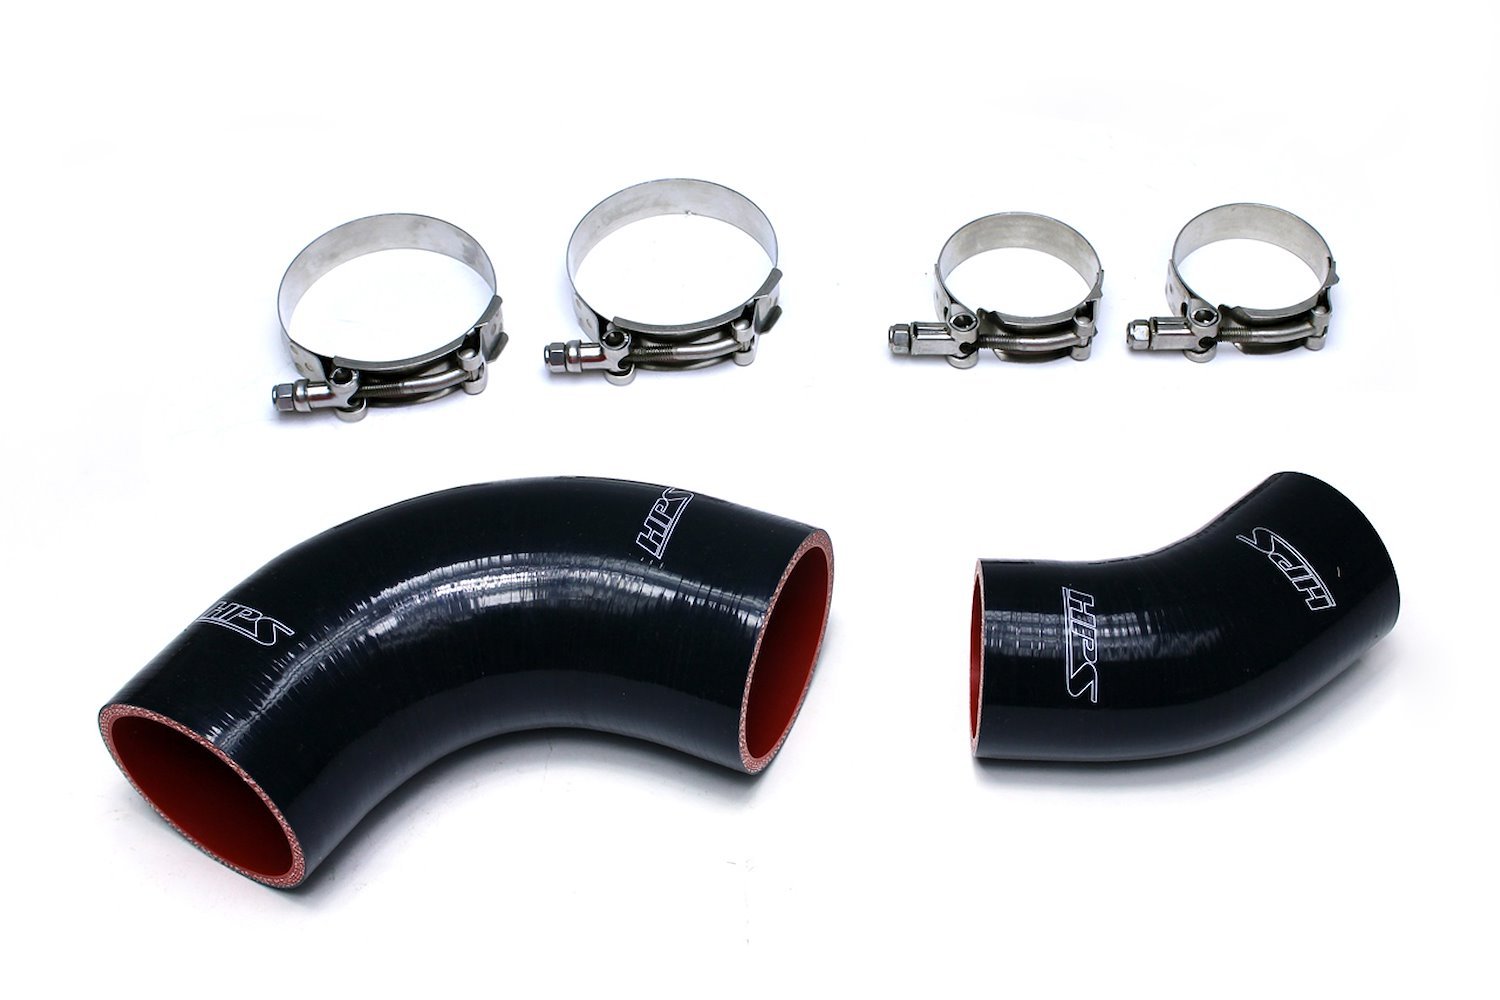 57-1486-BLK Intercooler Hose Kit, High-Temp 4-Ply Reinforced Silicone, Replace OEM Rubber Intercooler Turbo Boots